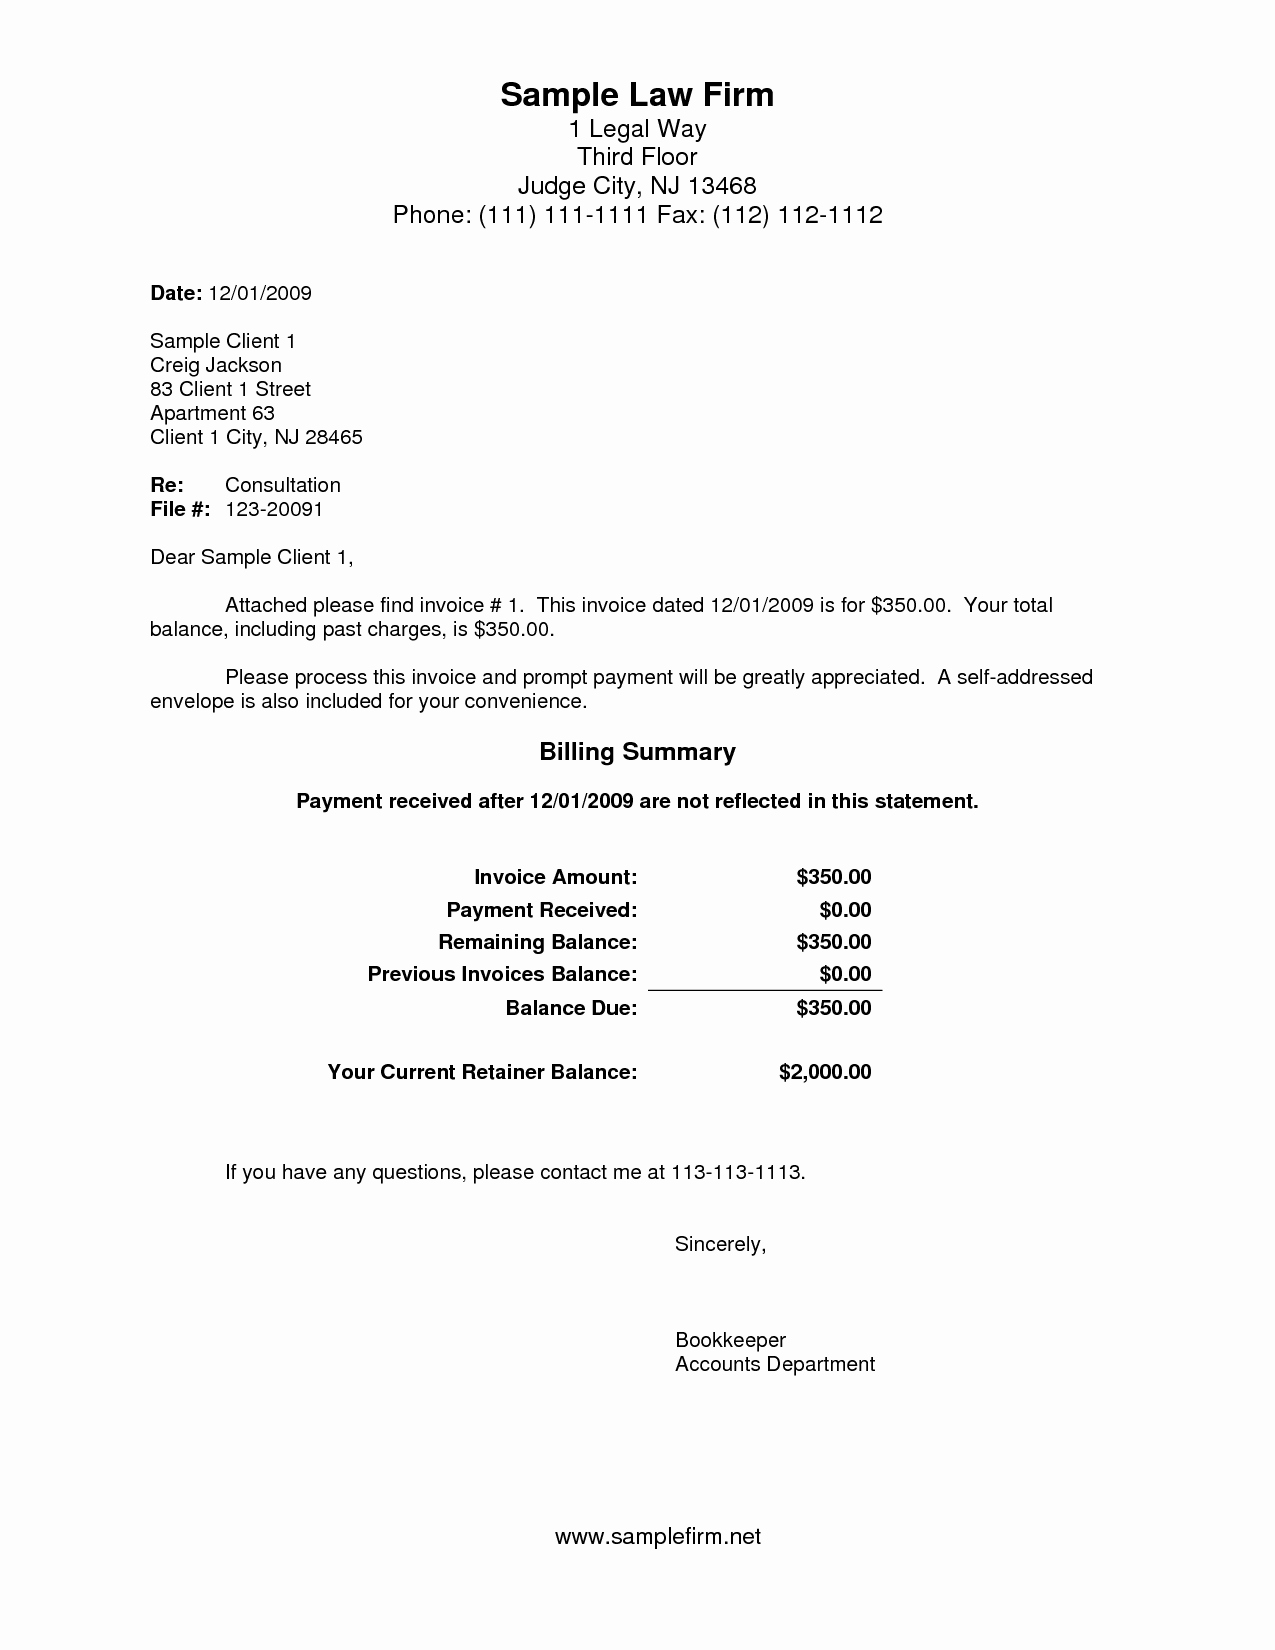 Services Rendered Invoice Template Beautiful Example Invoice for Services Rendered Invoice Template